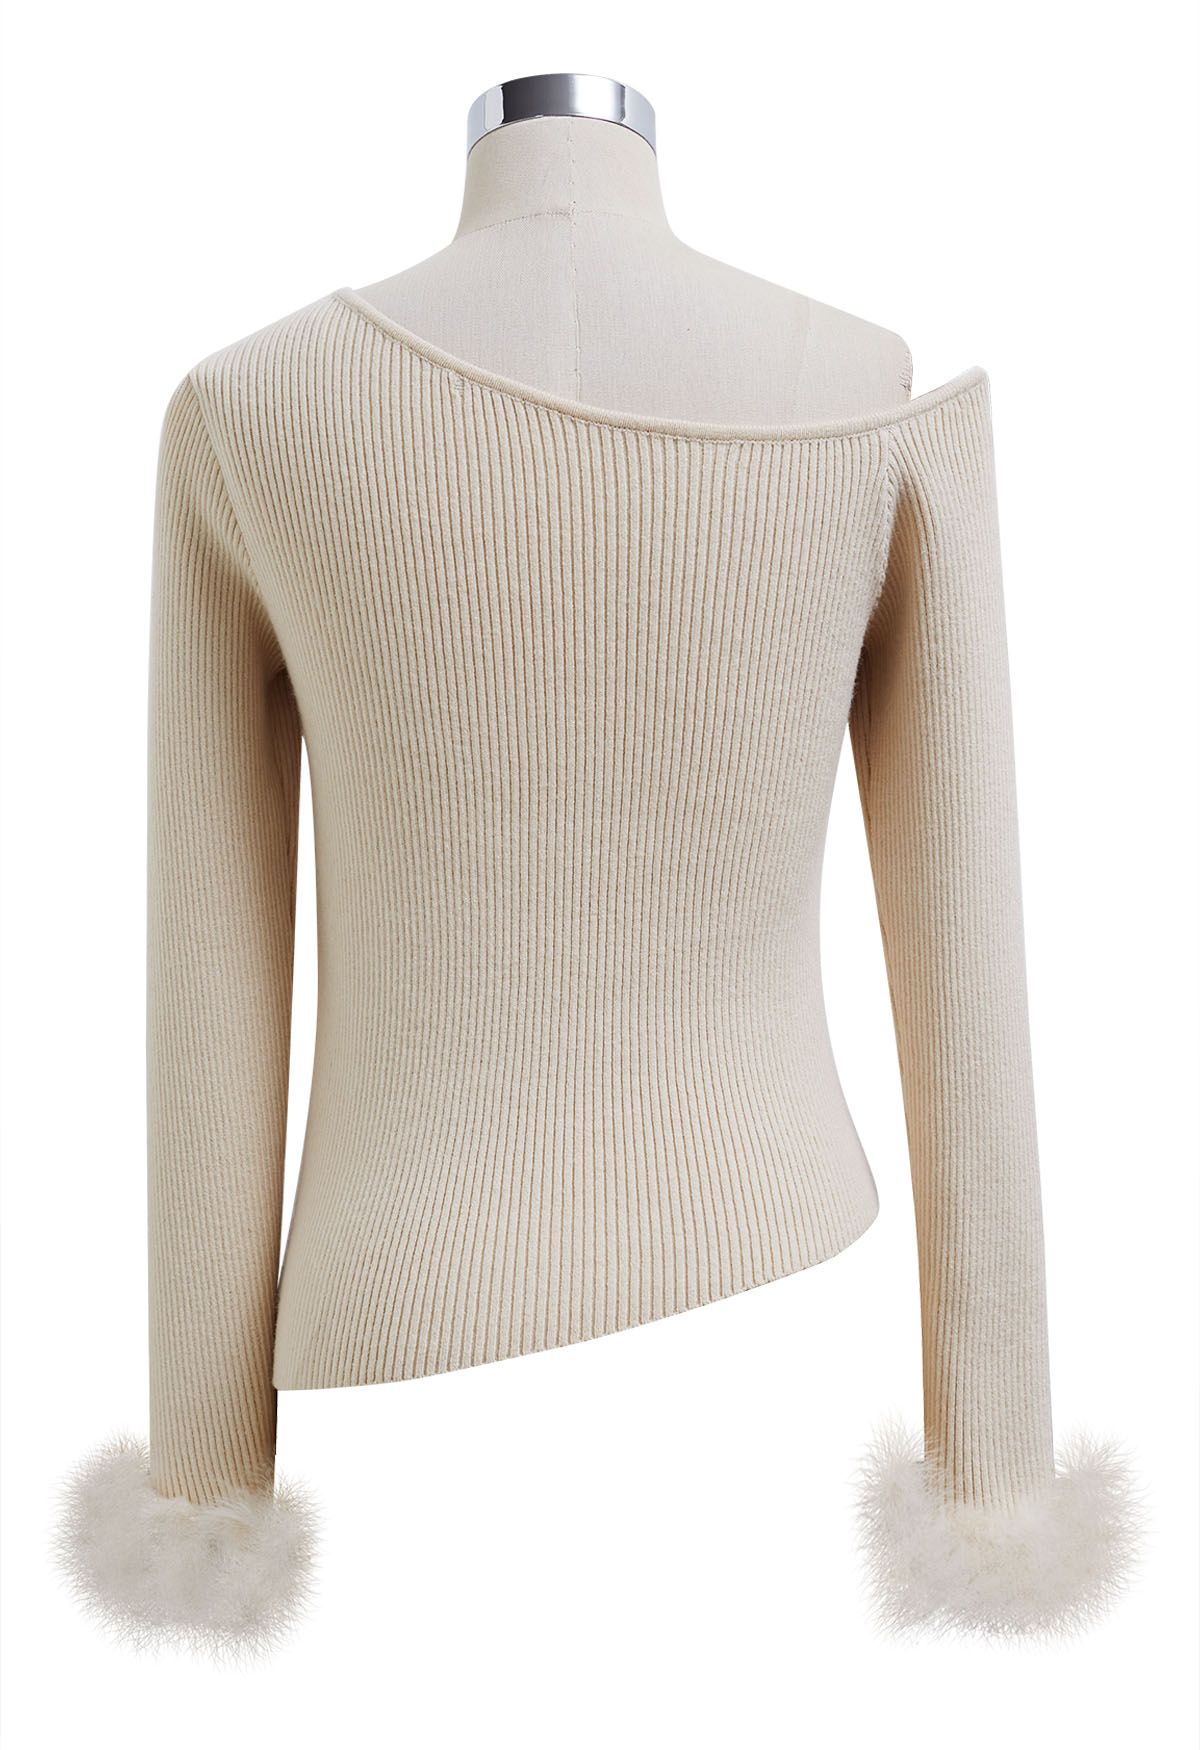 One-Shoulder Feathered Cuffs Knit Top in Cream